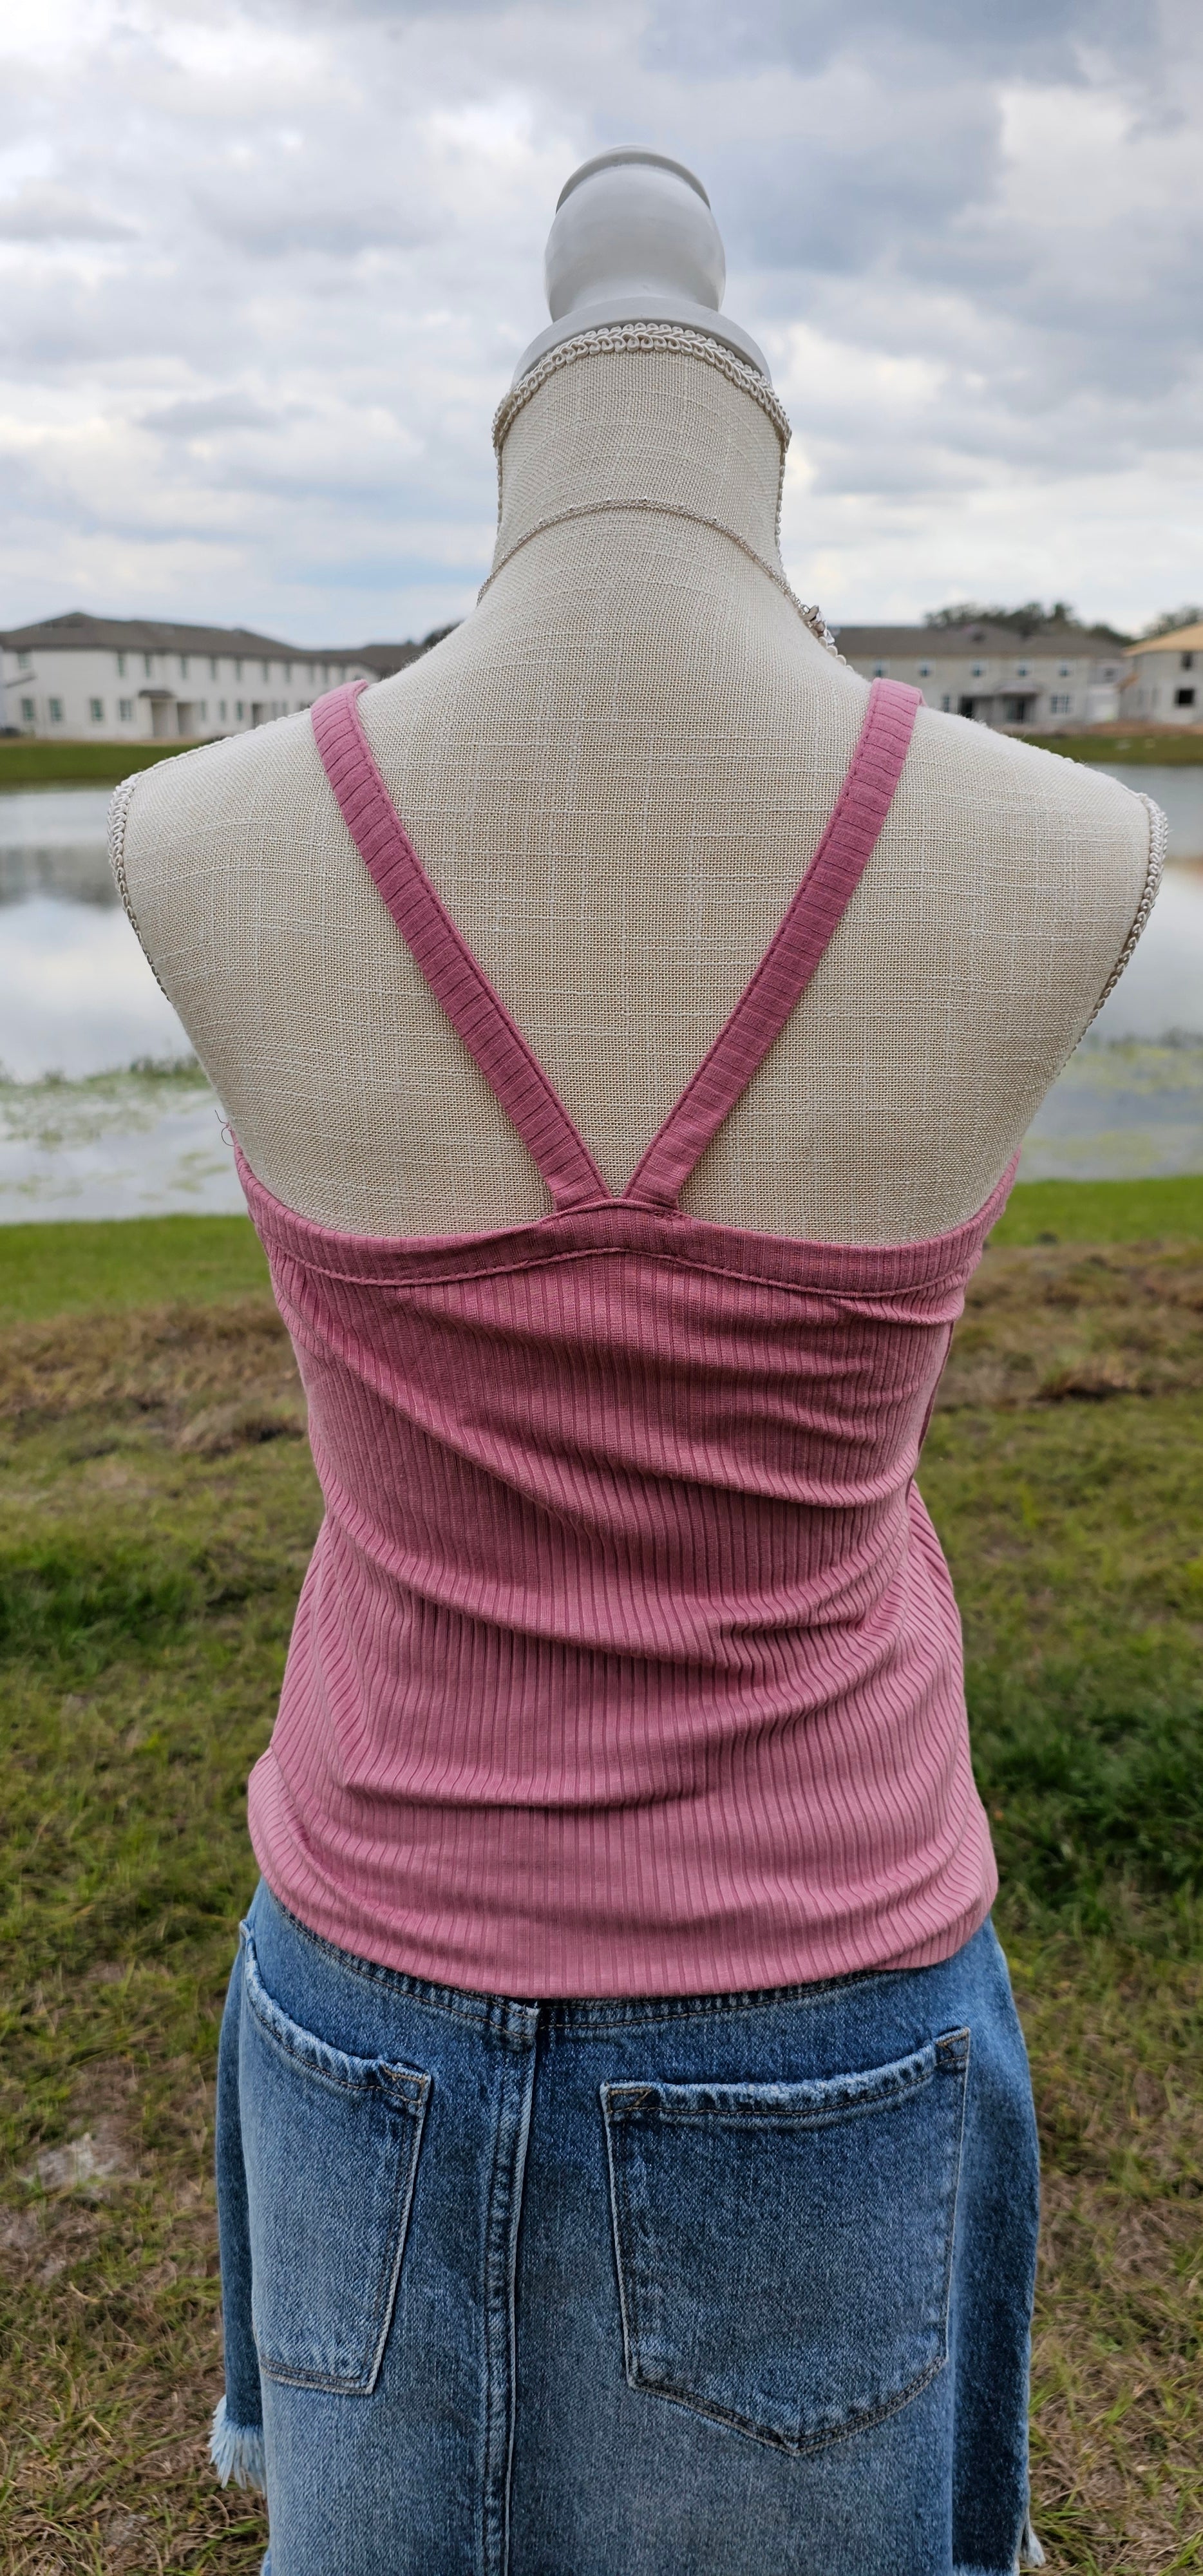 This “Basic Babe Tank Top: Dusty Rose” features a ribbed fabric, sleeveless tank top with v-neck and back. This is a great basic staple piece! Sizes small through x-large.This “Basic Babe Tank Top: Dusty Rose” features a ribbed fabric, sleeveless tank top with v-neck and back. This is a great basic staple piece! Sizes small through x-large.